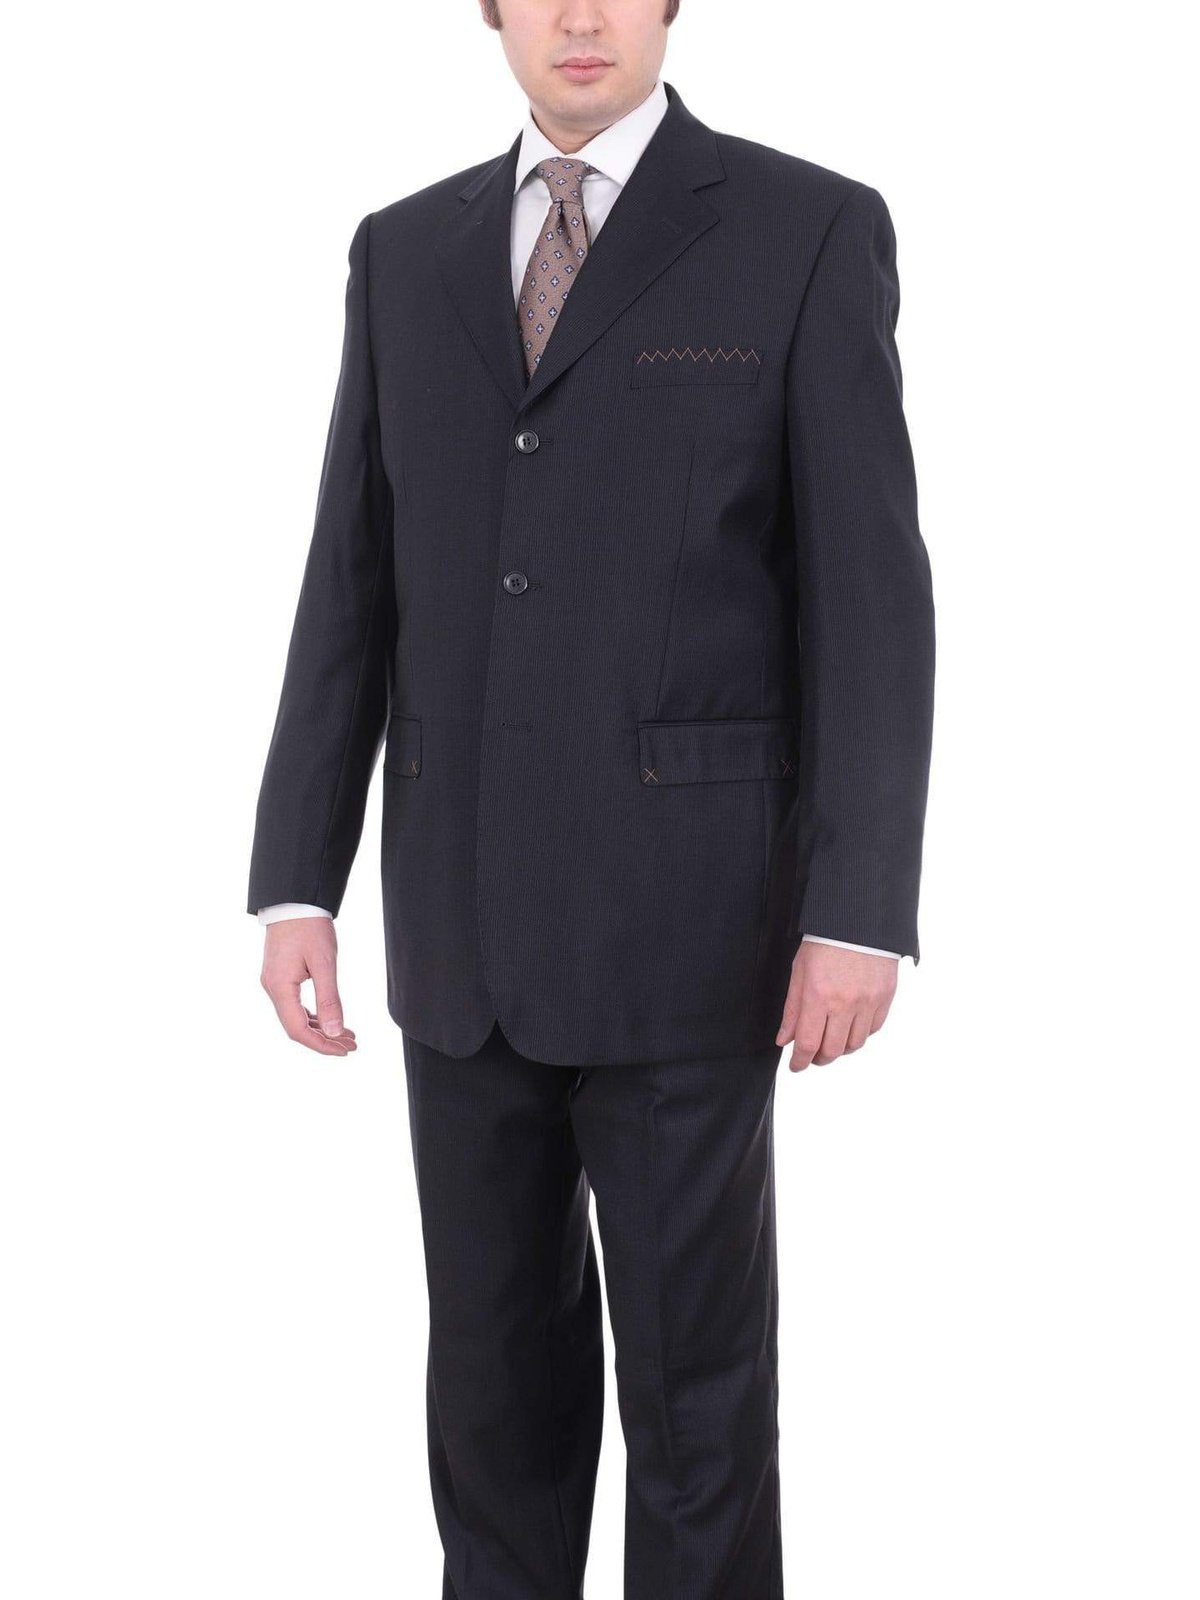 Carlo Palazzi Sale Suits 46L Mens Italy Classic Fit Navy Blue 3 Button Pleated 100% Wool Suit